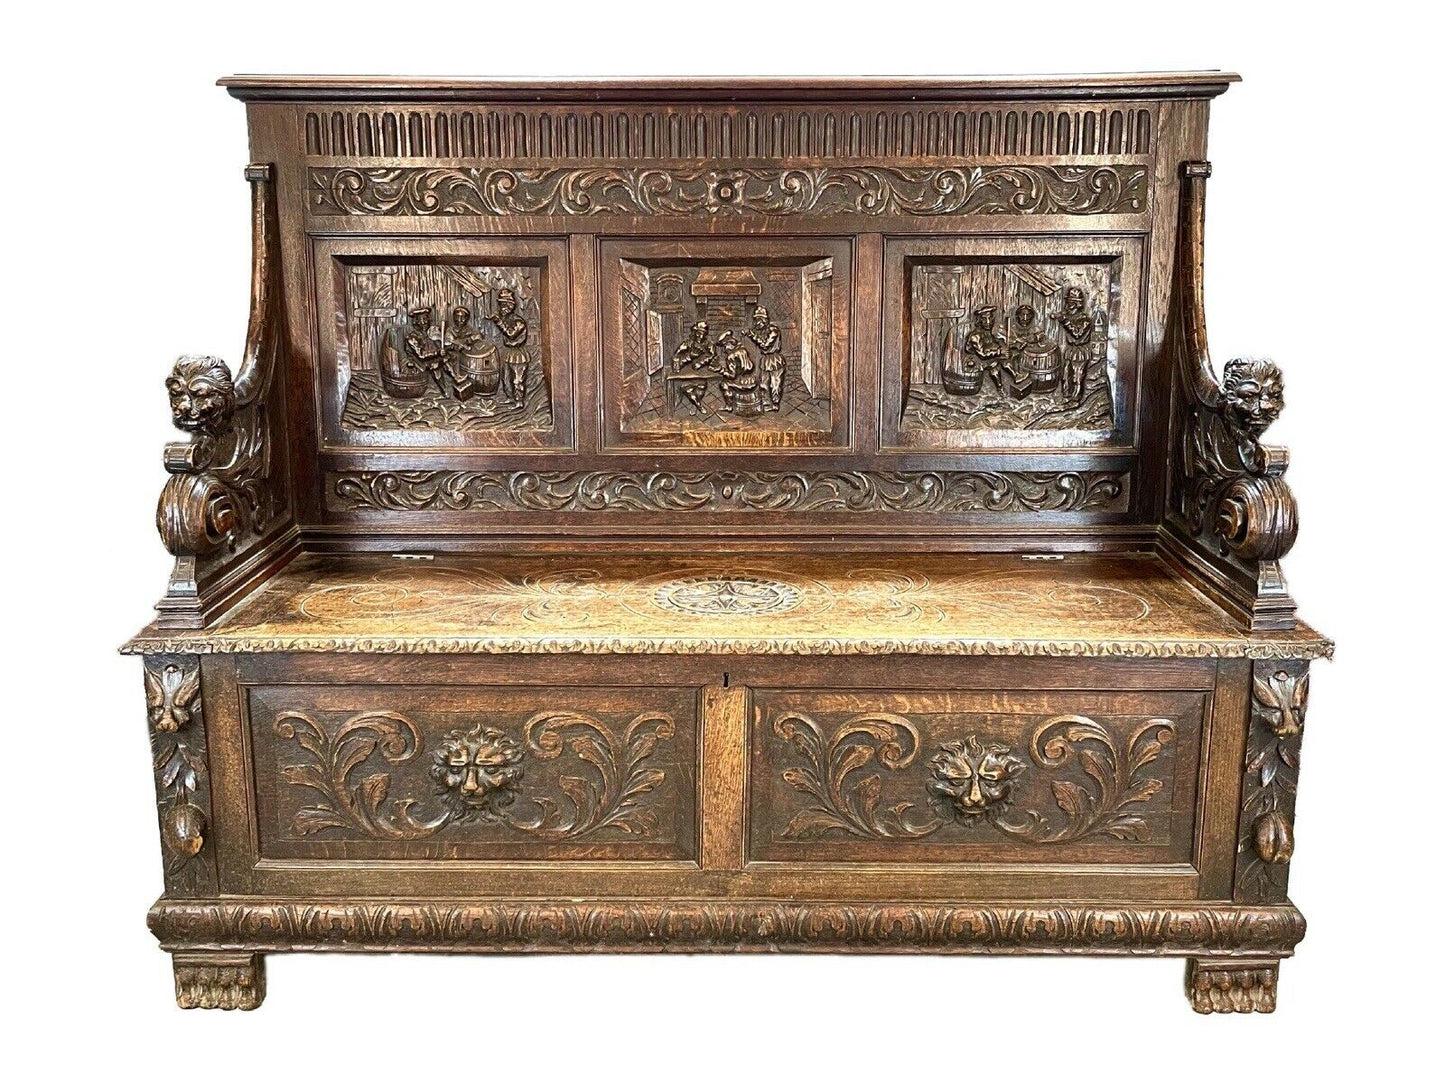 A Carved, 19th Century, Flemish Style, Oak Bench / Settle